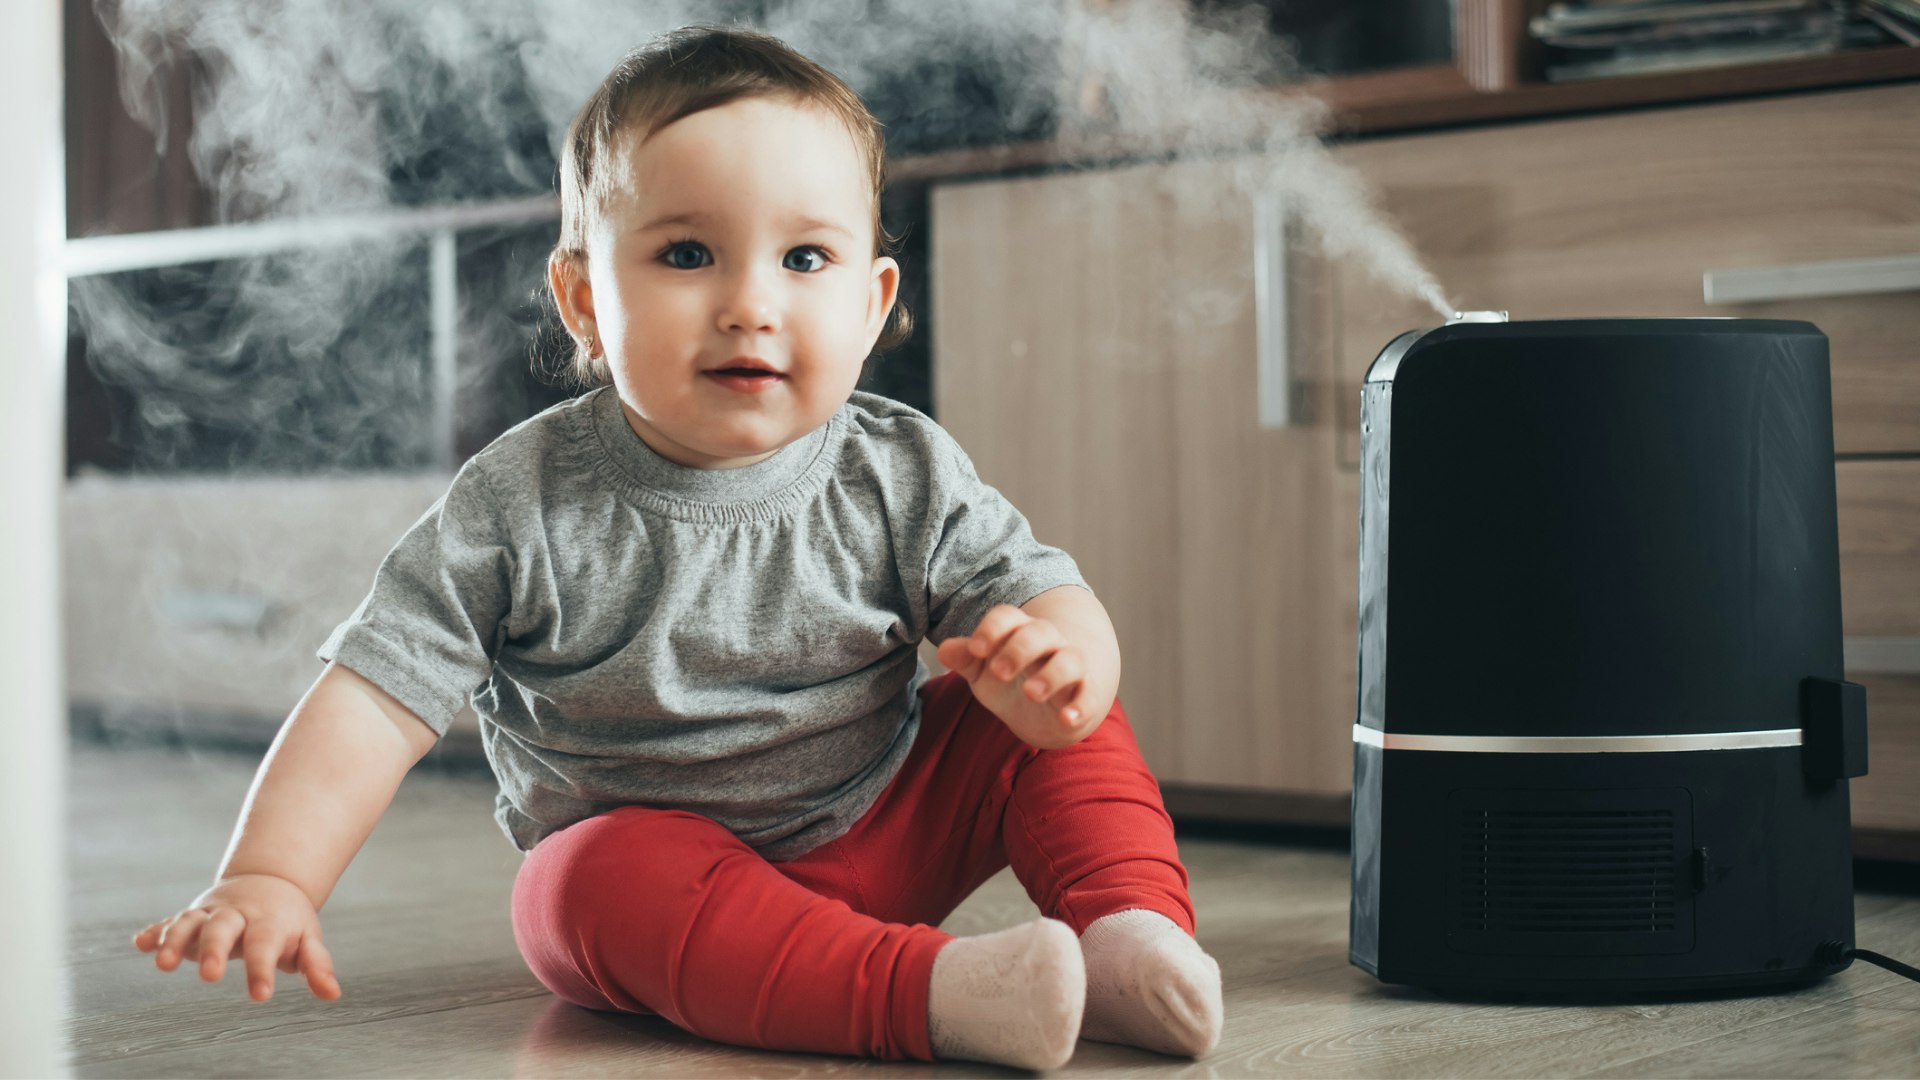 The 7 Best Humidifiers for Your Baby, With Advice From Pediatricians